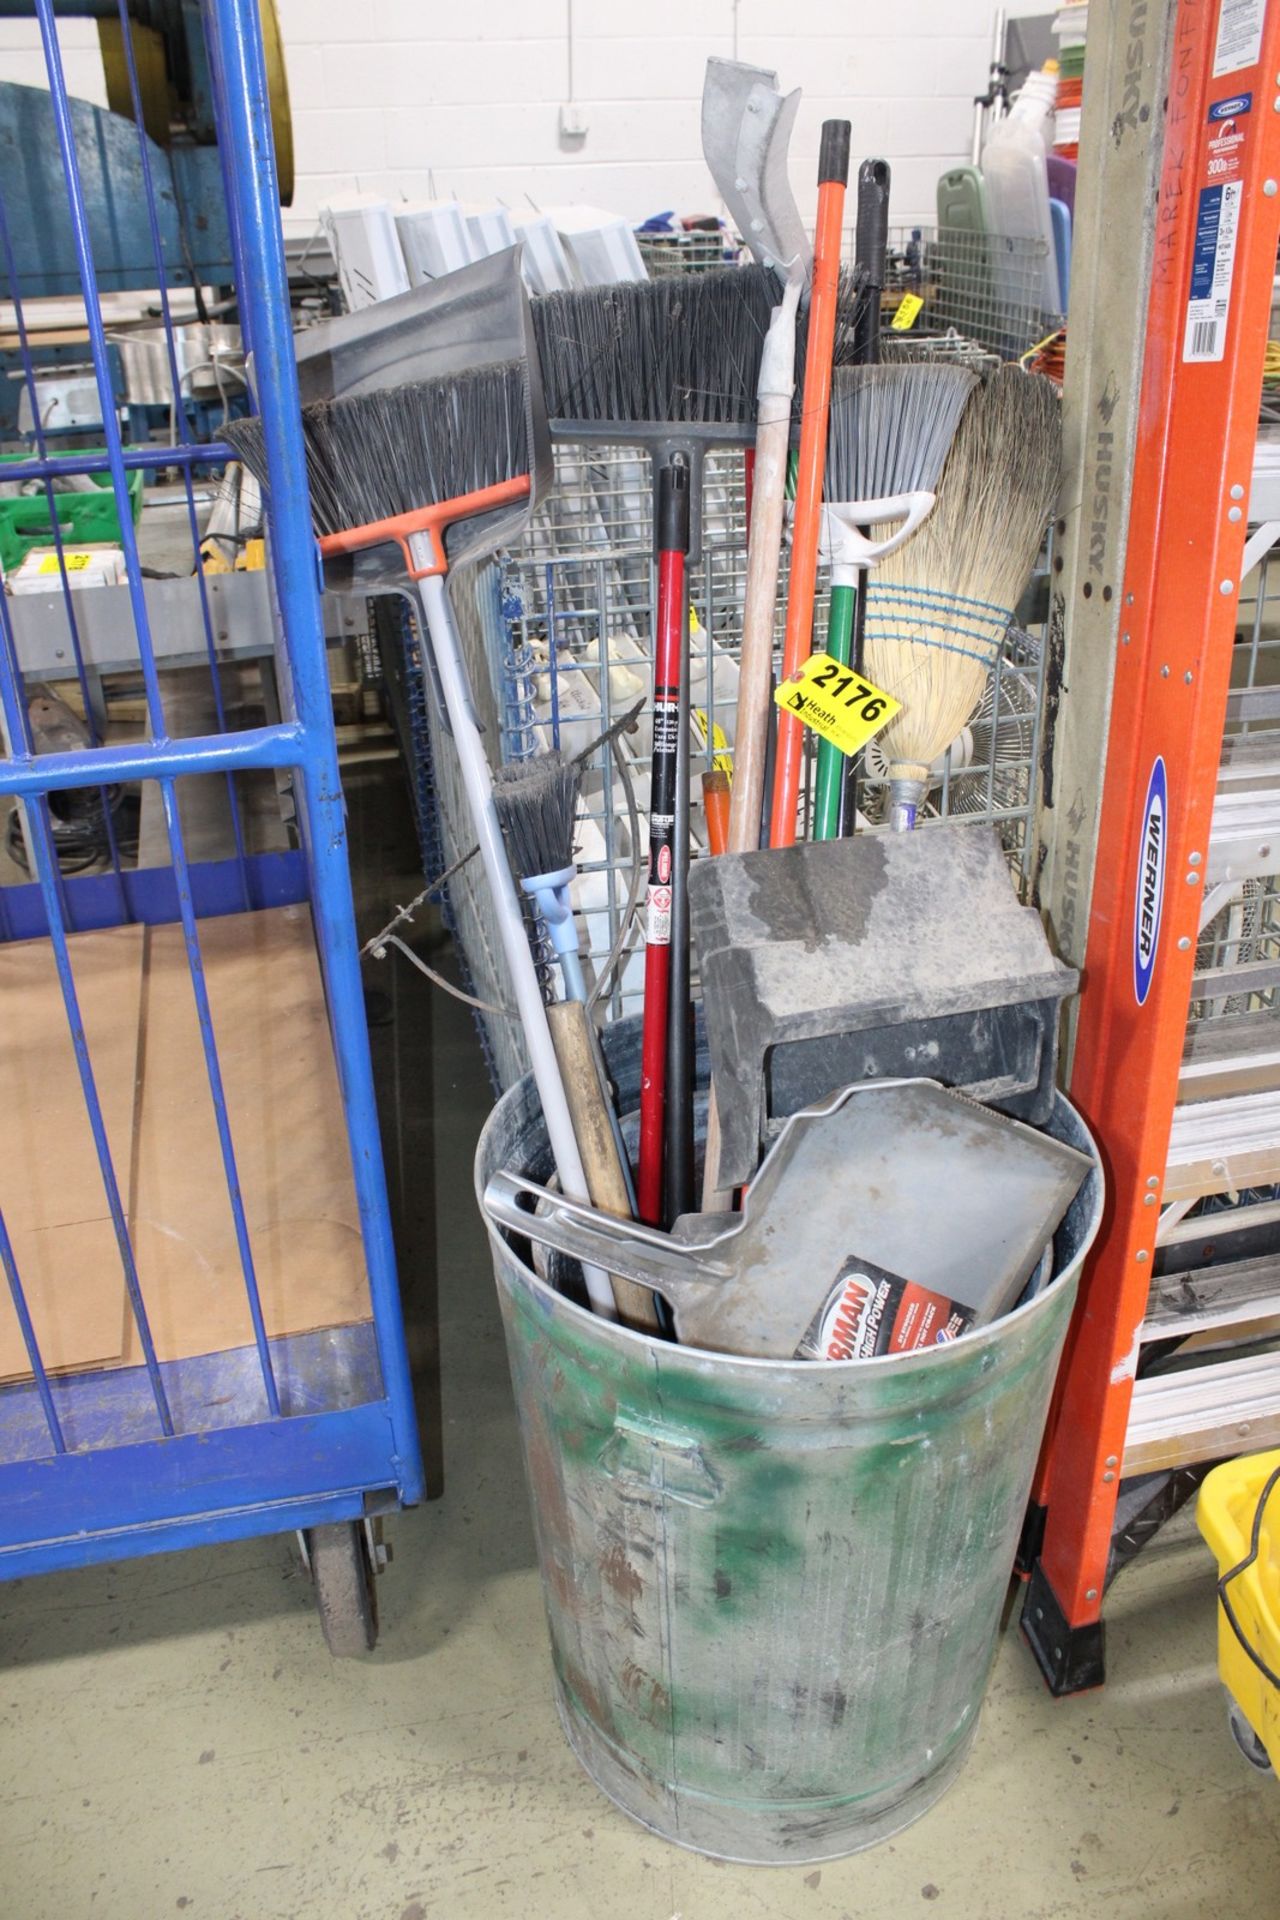 BROOMS, DUST PANS, GARBAGE CANS